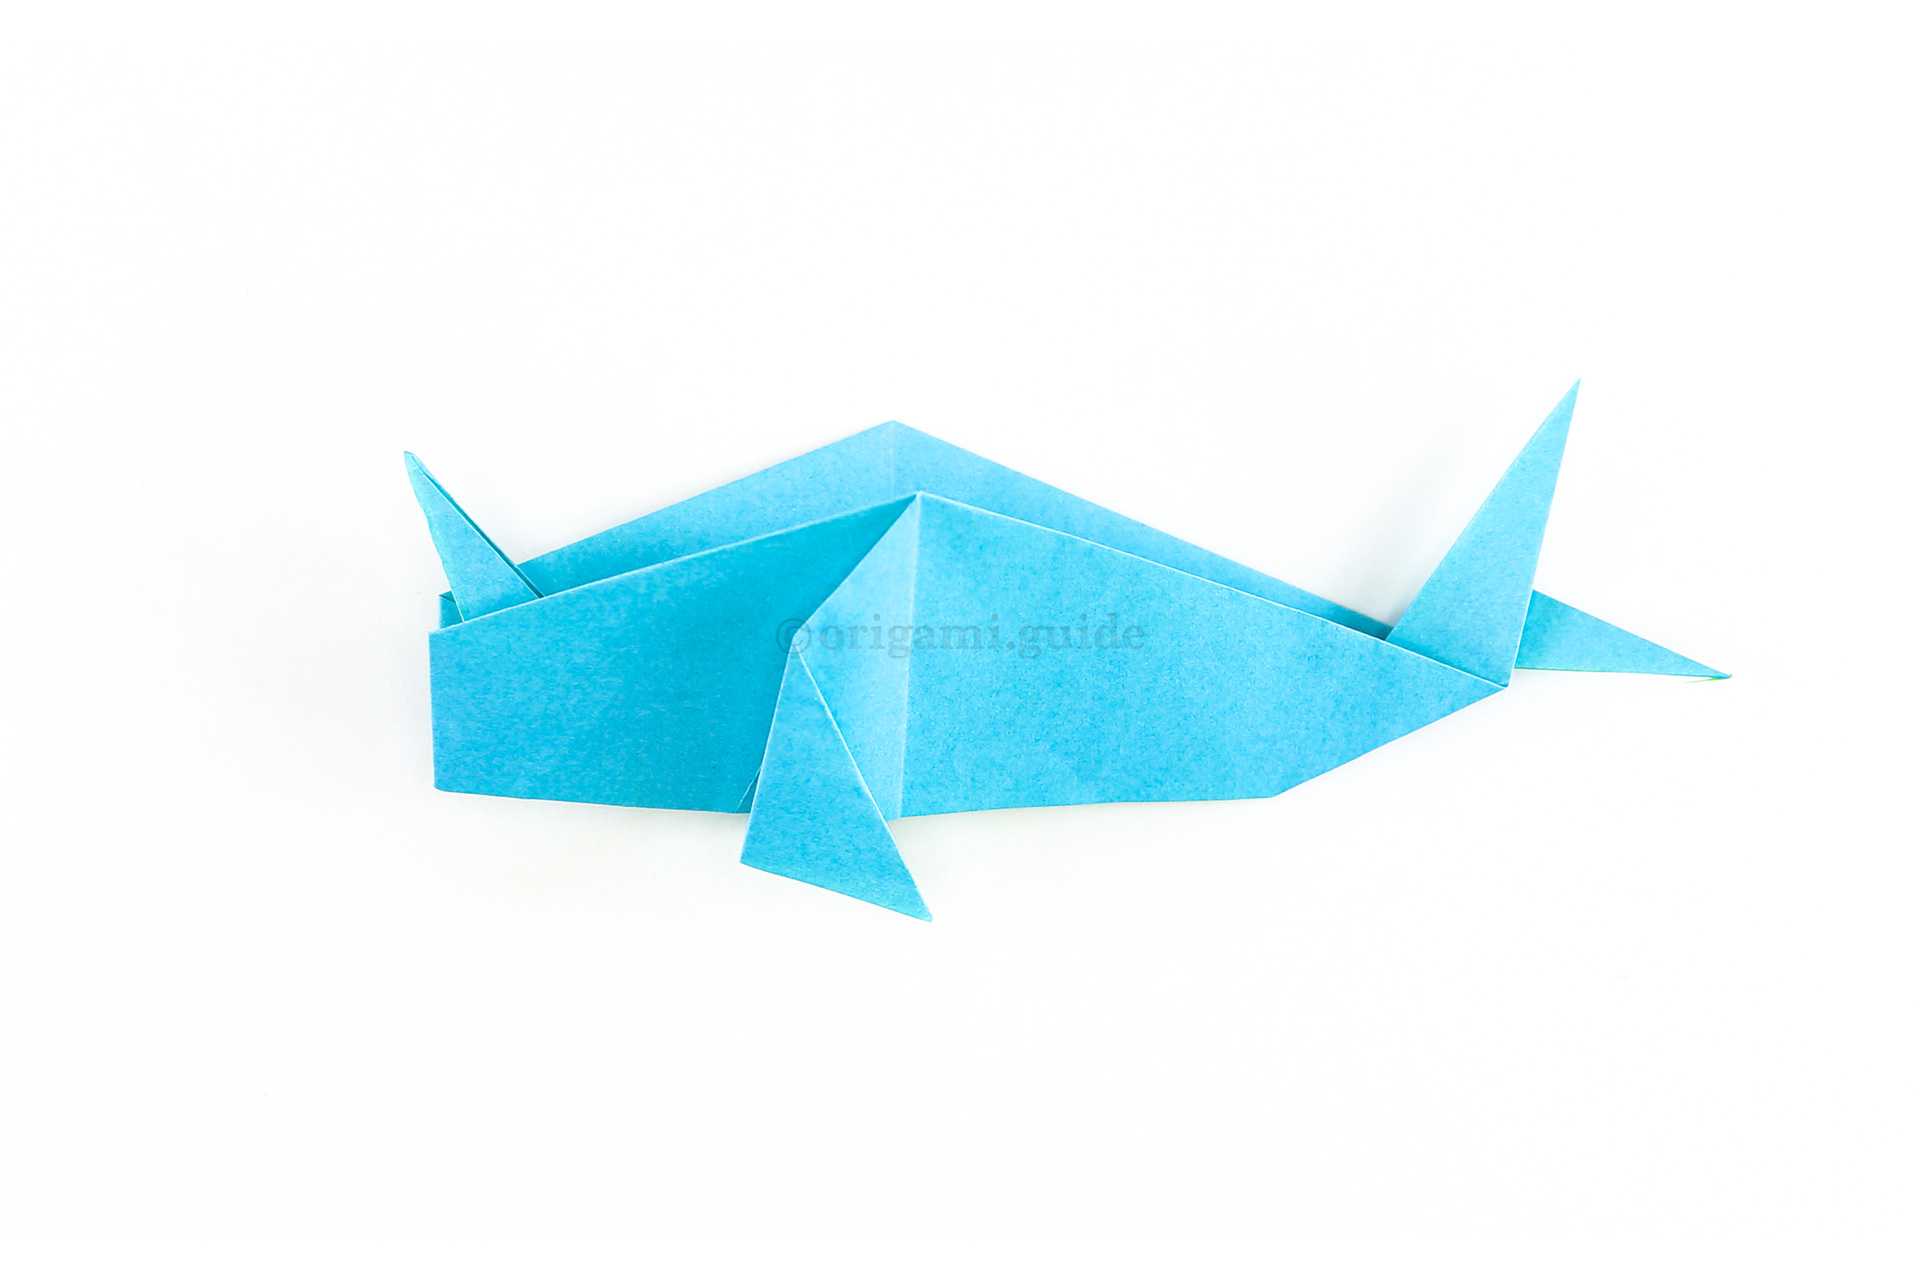 Fold the whale back in half and then pull the narwhal's tusk into a good position.